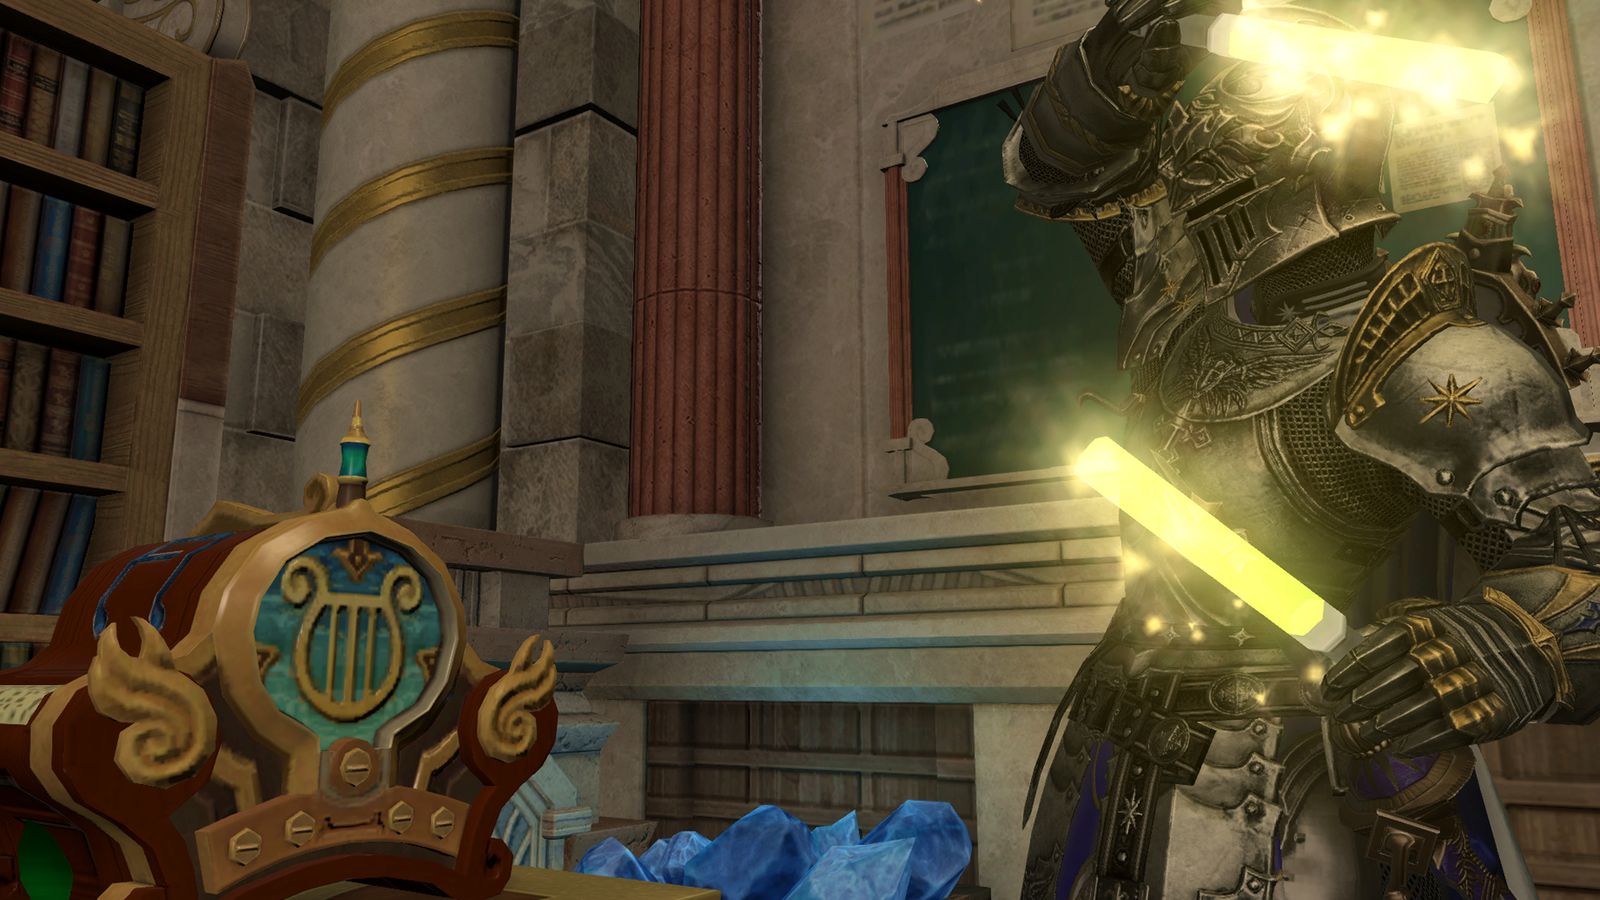 A picture of a knight from Final Fantasy XIV happily waving glowsticks in front of his orchestrion roll list.